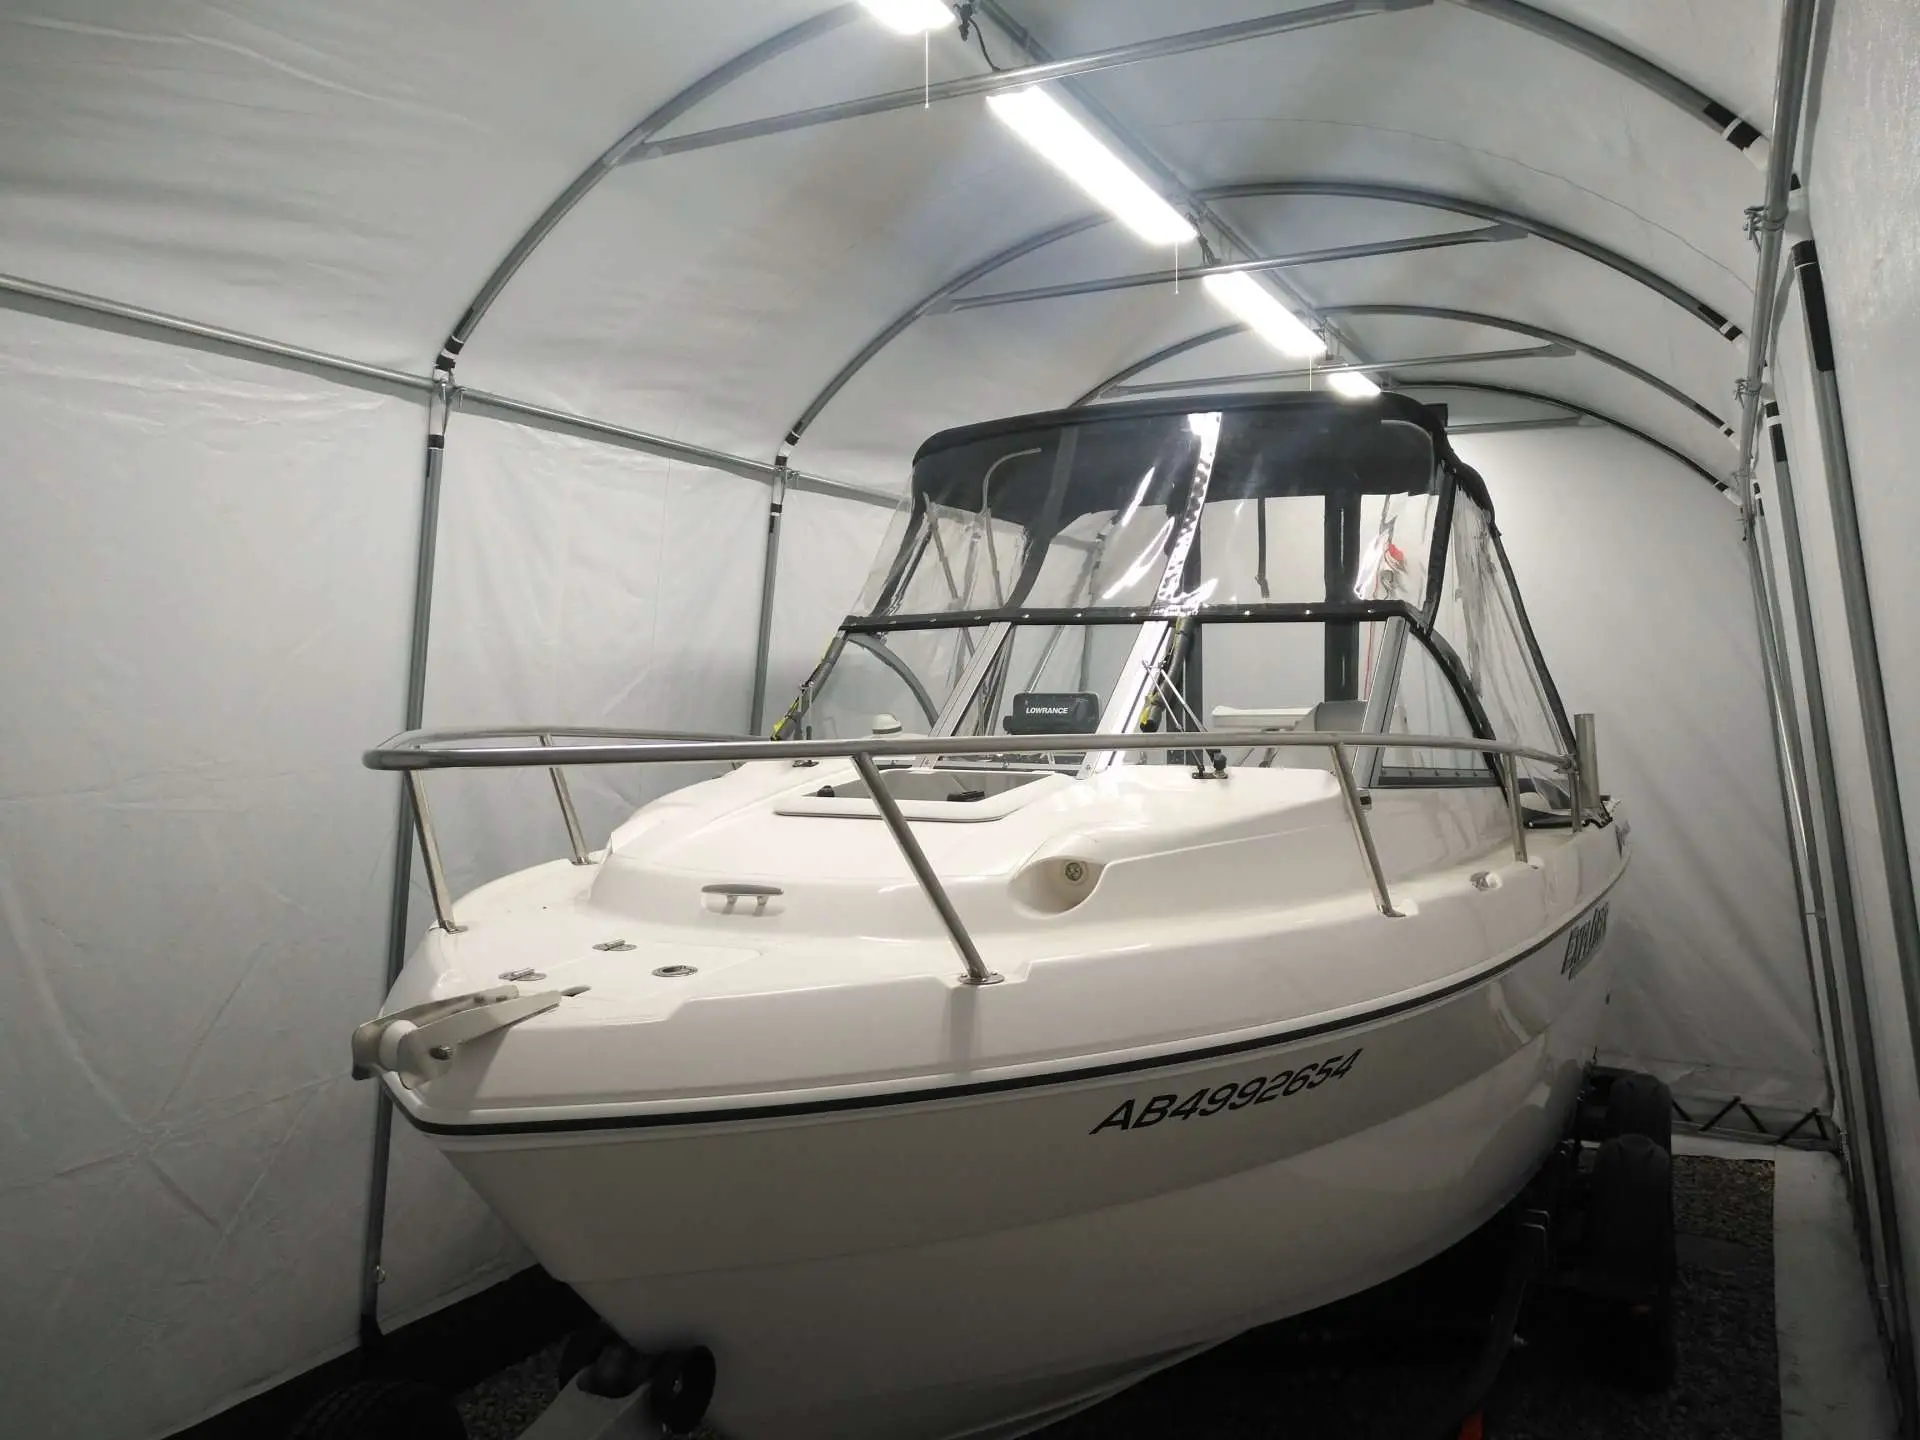 10+ Tips on Storing Your Boat for the Winter